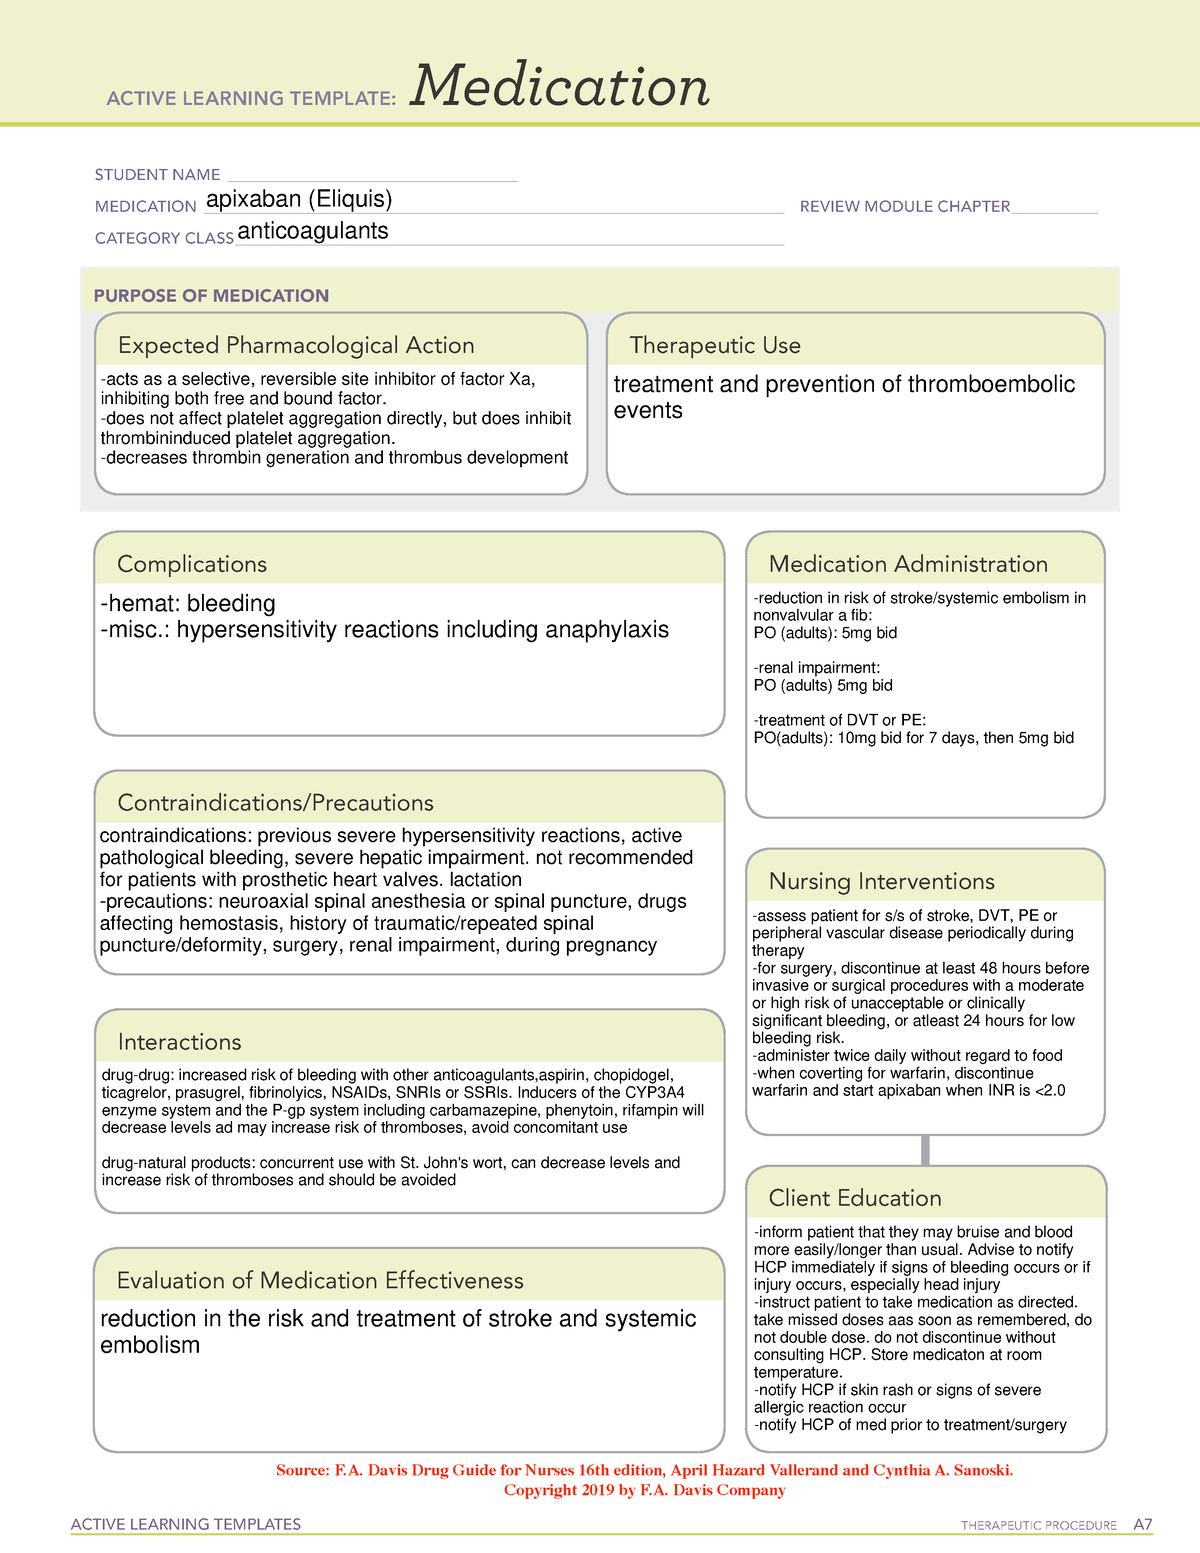 Apixaban (Eliquis) copy ACTIVE LEARNING TEMPLATES THERAPEUTIC